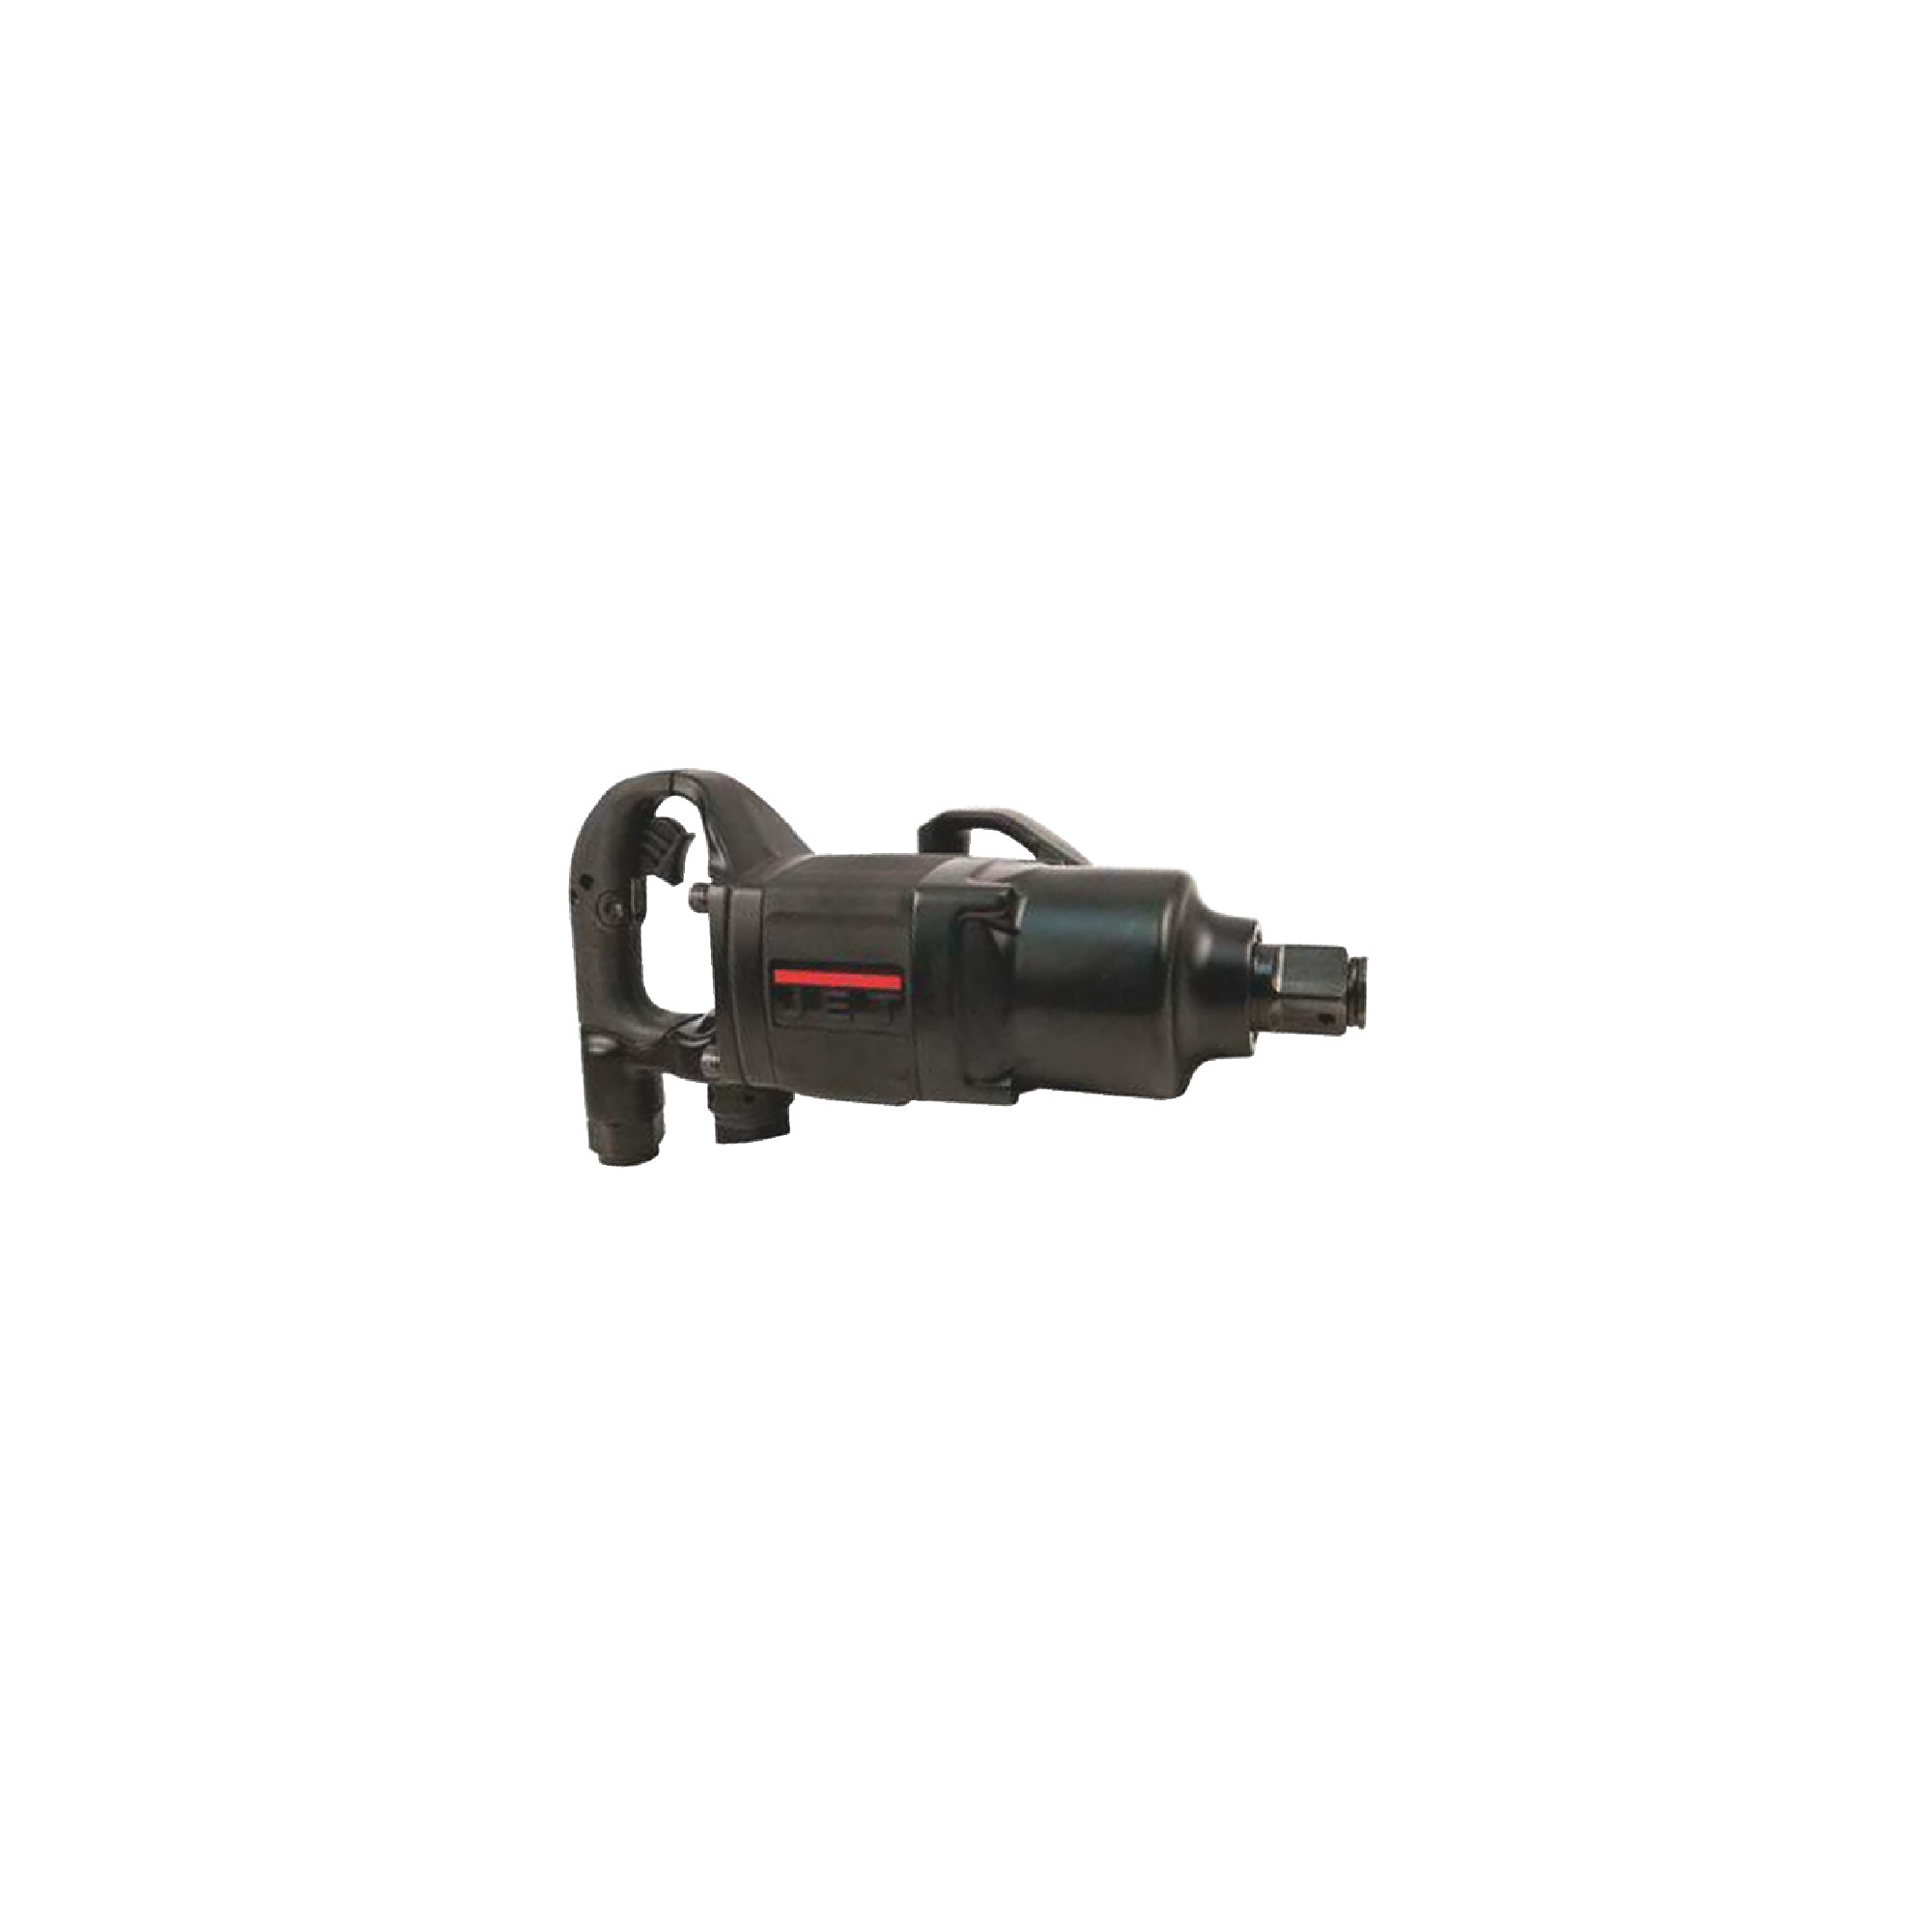 1-1/2" Air Impact Wrench with 6" Extension